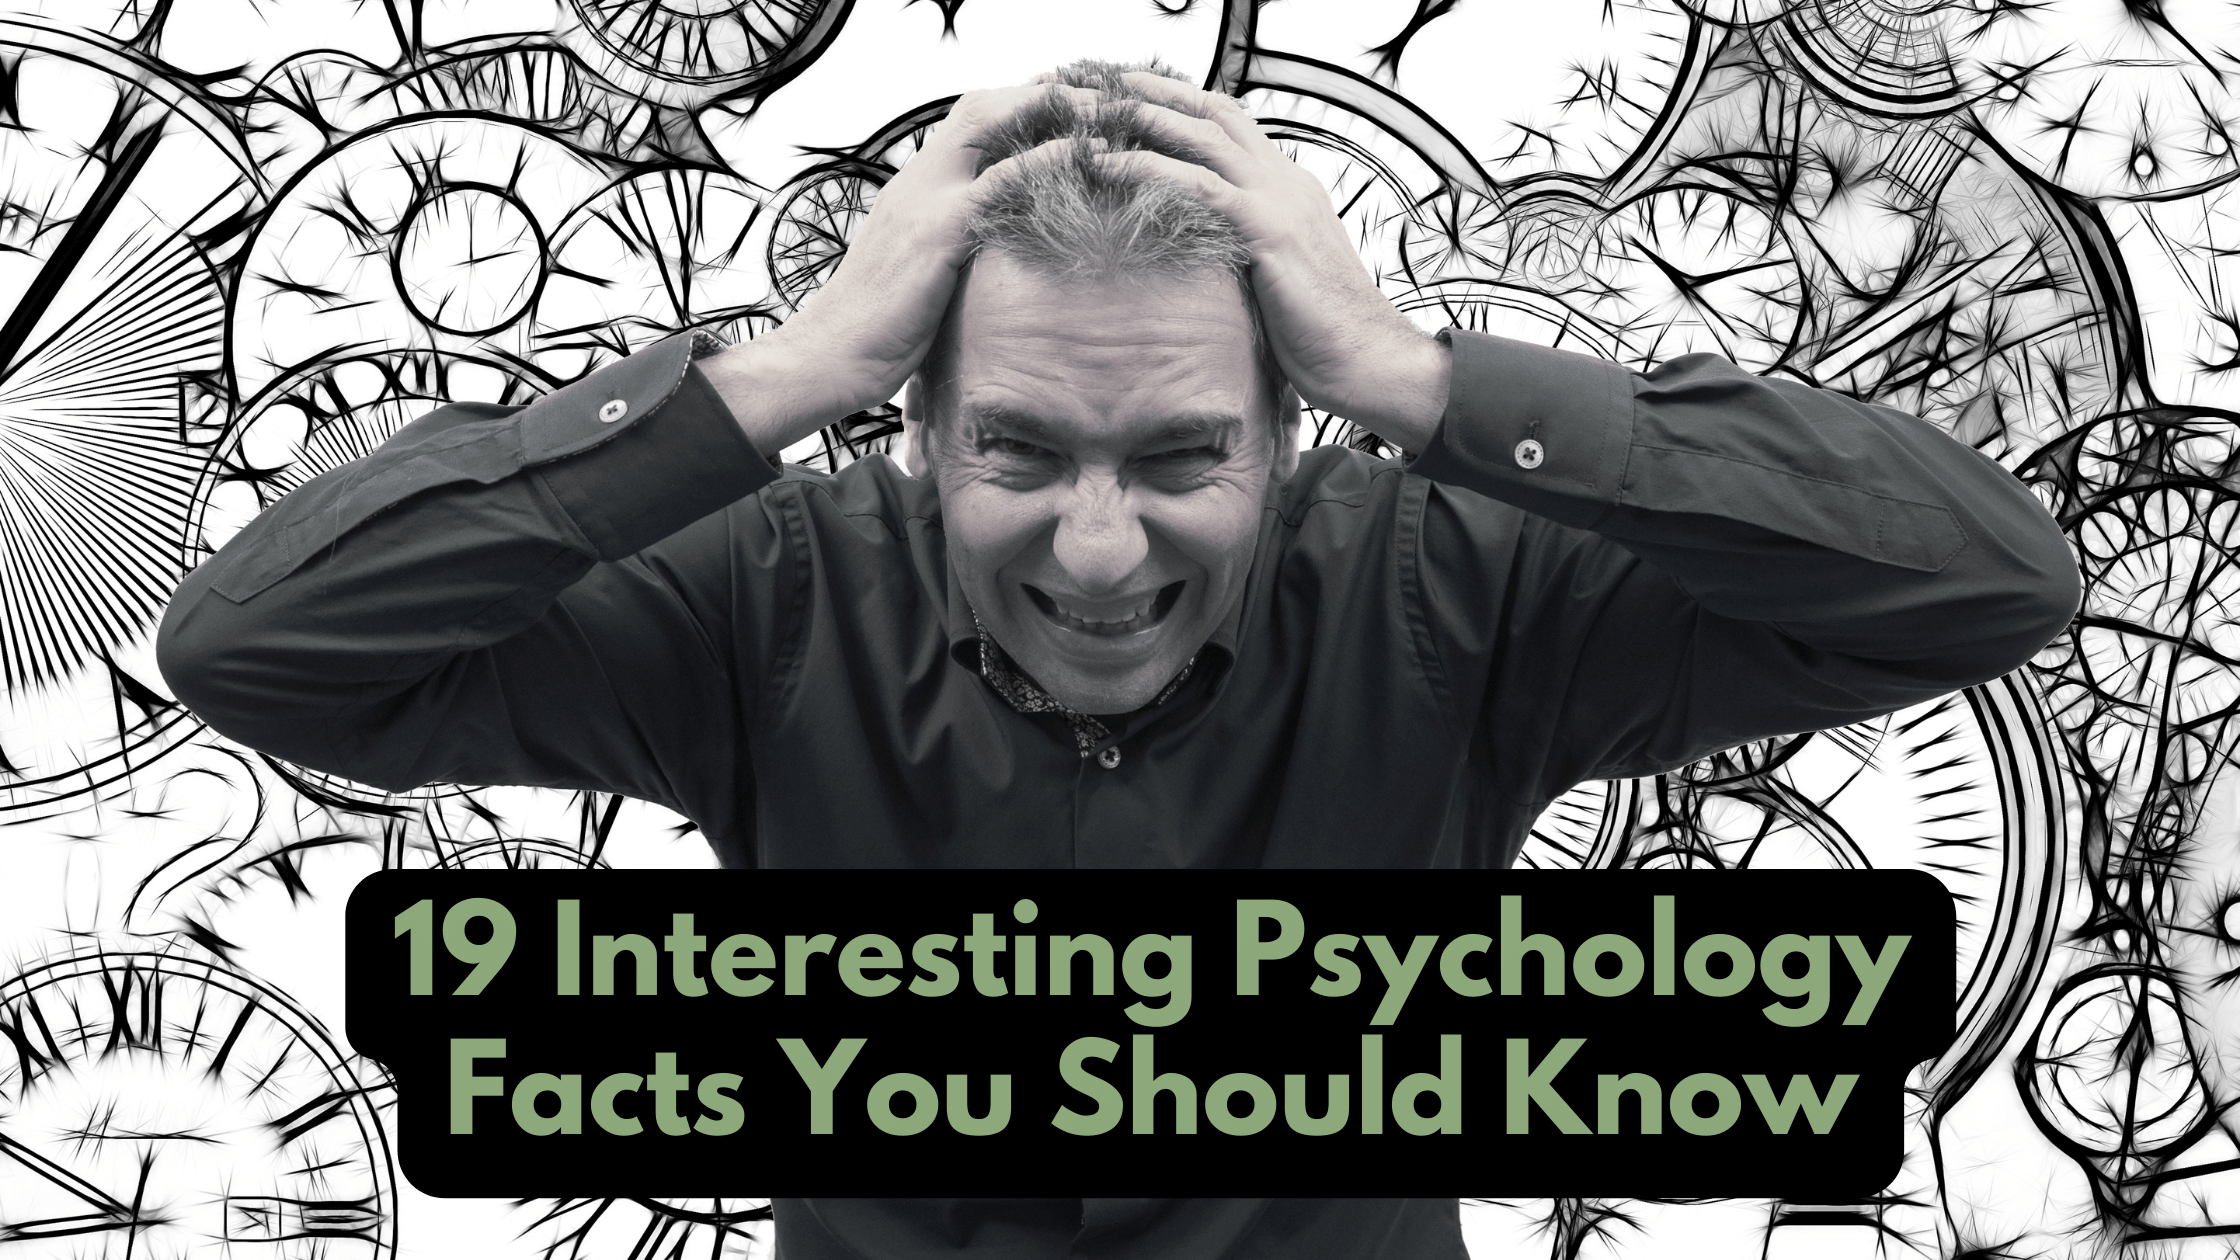 Psychology Facts You Should Know